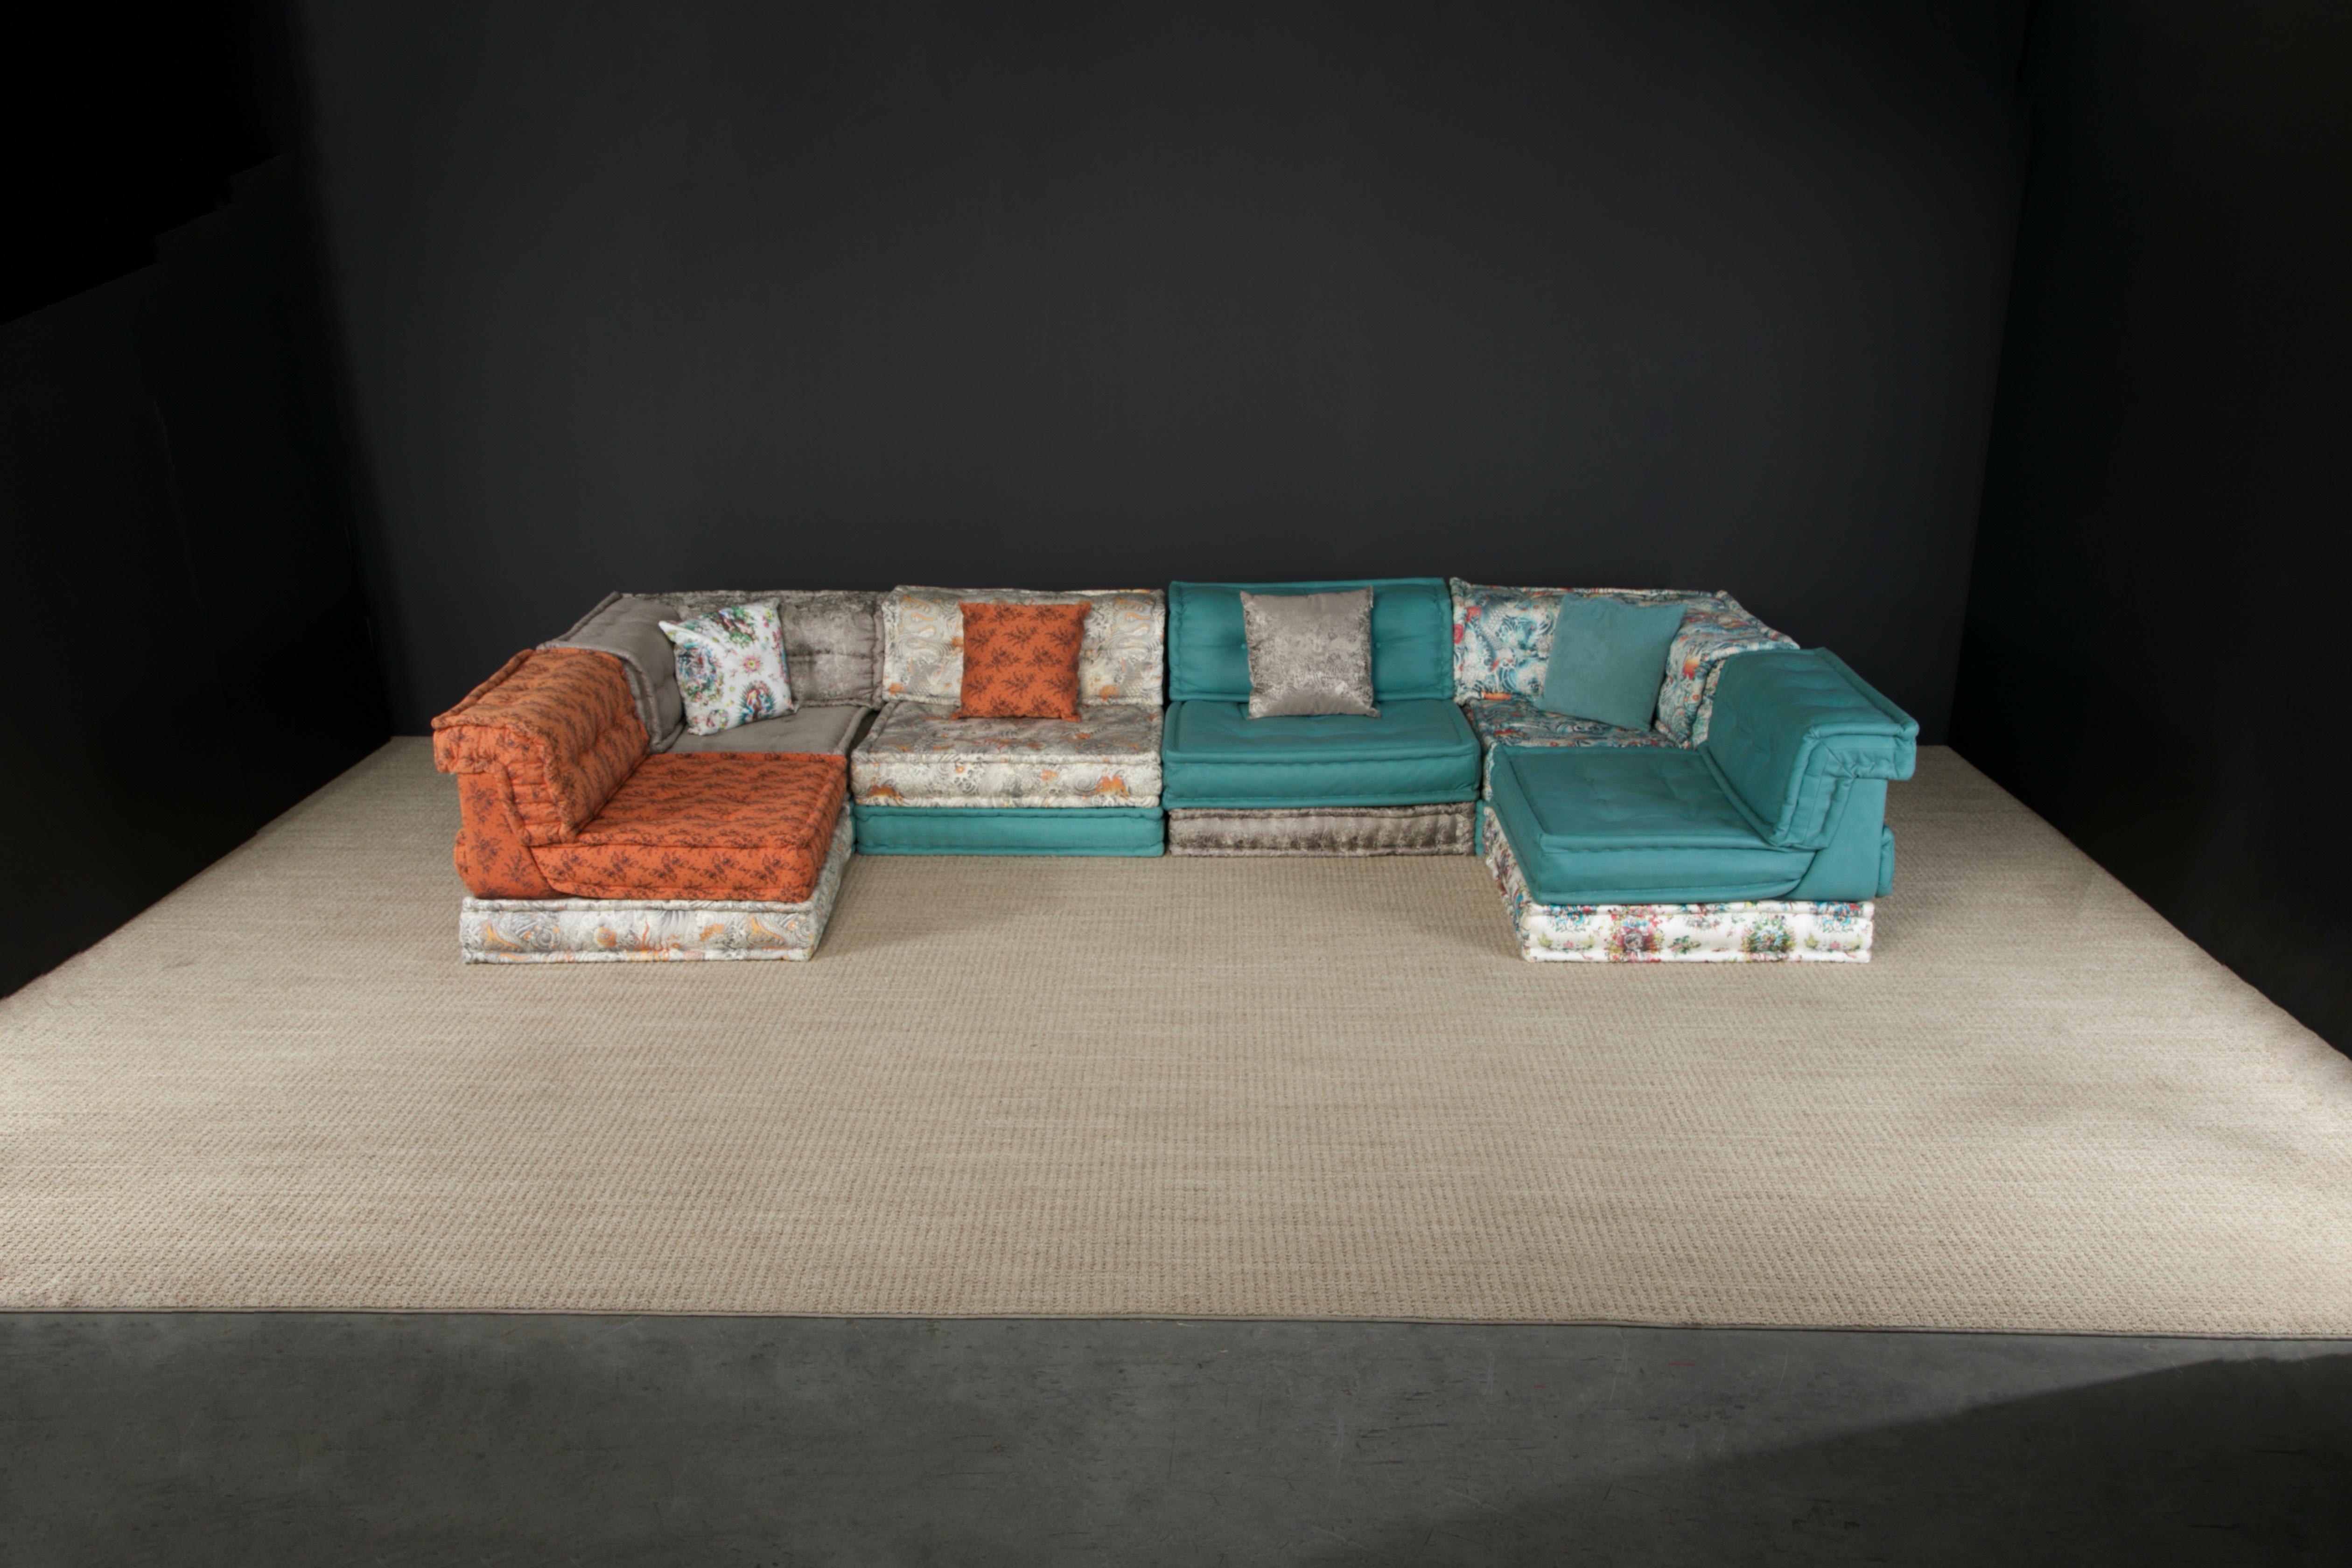 This large 22-piece living room set designed by Hans Hopfer for Roche Bobois, is called the 